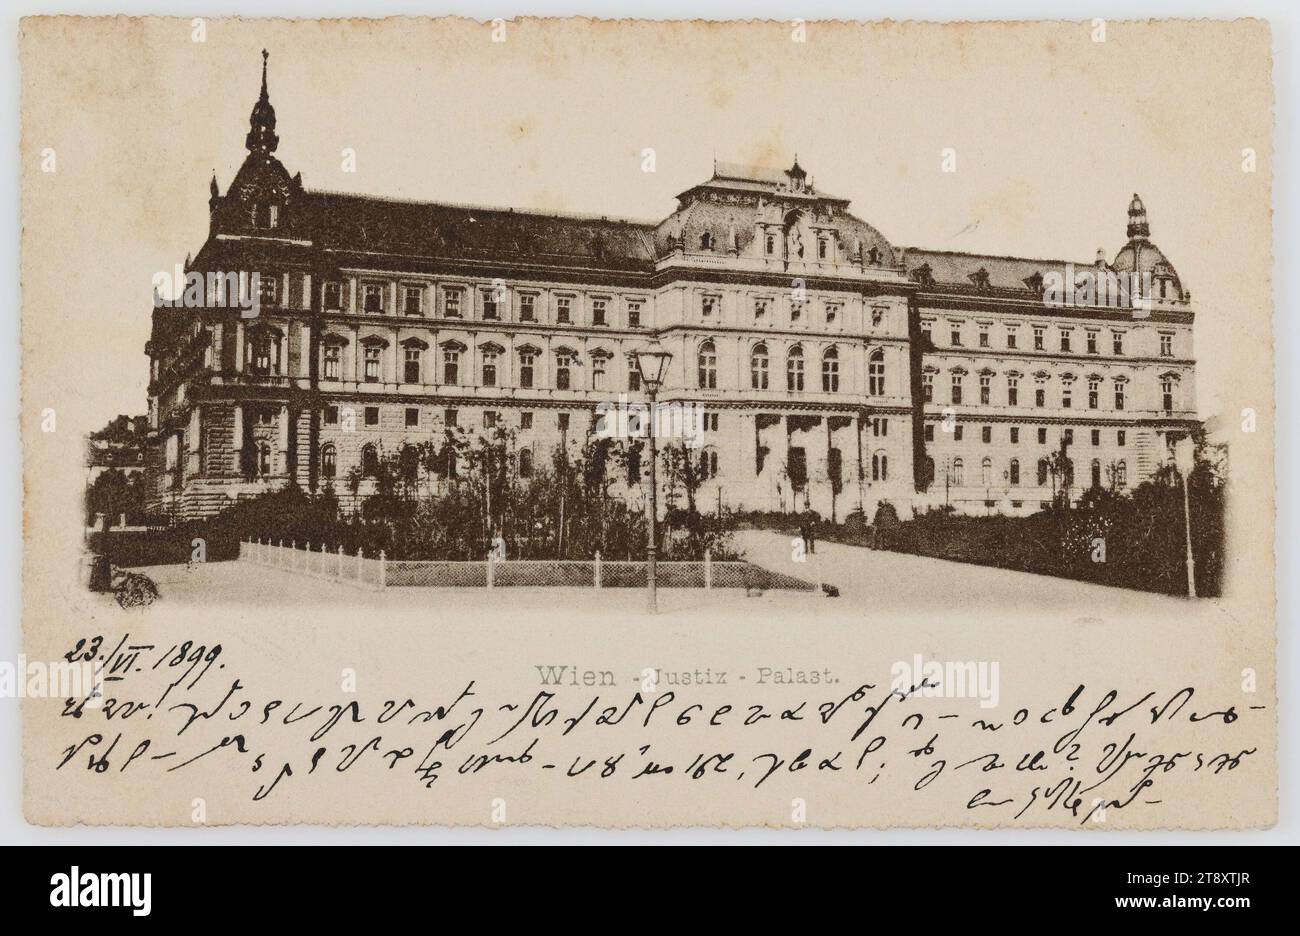 Vienna - Palace of Justice, Unknown, 1899, paperboard, Collotype, Inscription, FROM, Vienna, TO, Scheibbs, ADDRESS, Wohlgeboren Fräulein [name] Lehrerin Scheibbs N.Ö., MESSAGE, 13., VI. 1899. [steno] Quick writing? Upper and lower case are hardly noticed, Dearest Hermine, Meaning: thanks for a card, Law and Justice, Media and Communication, Postcards with transliteration, 1st District: Innere Stadt, Justizpalast, handwriting, written text, Schmerlingplatz, The Vienna Collection Stock Photo